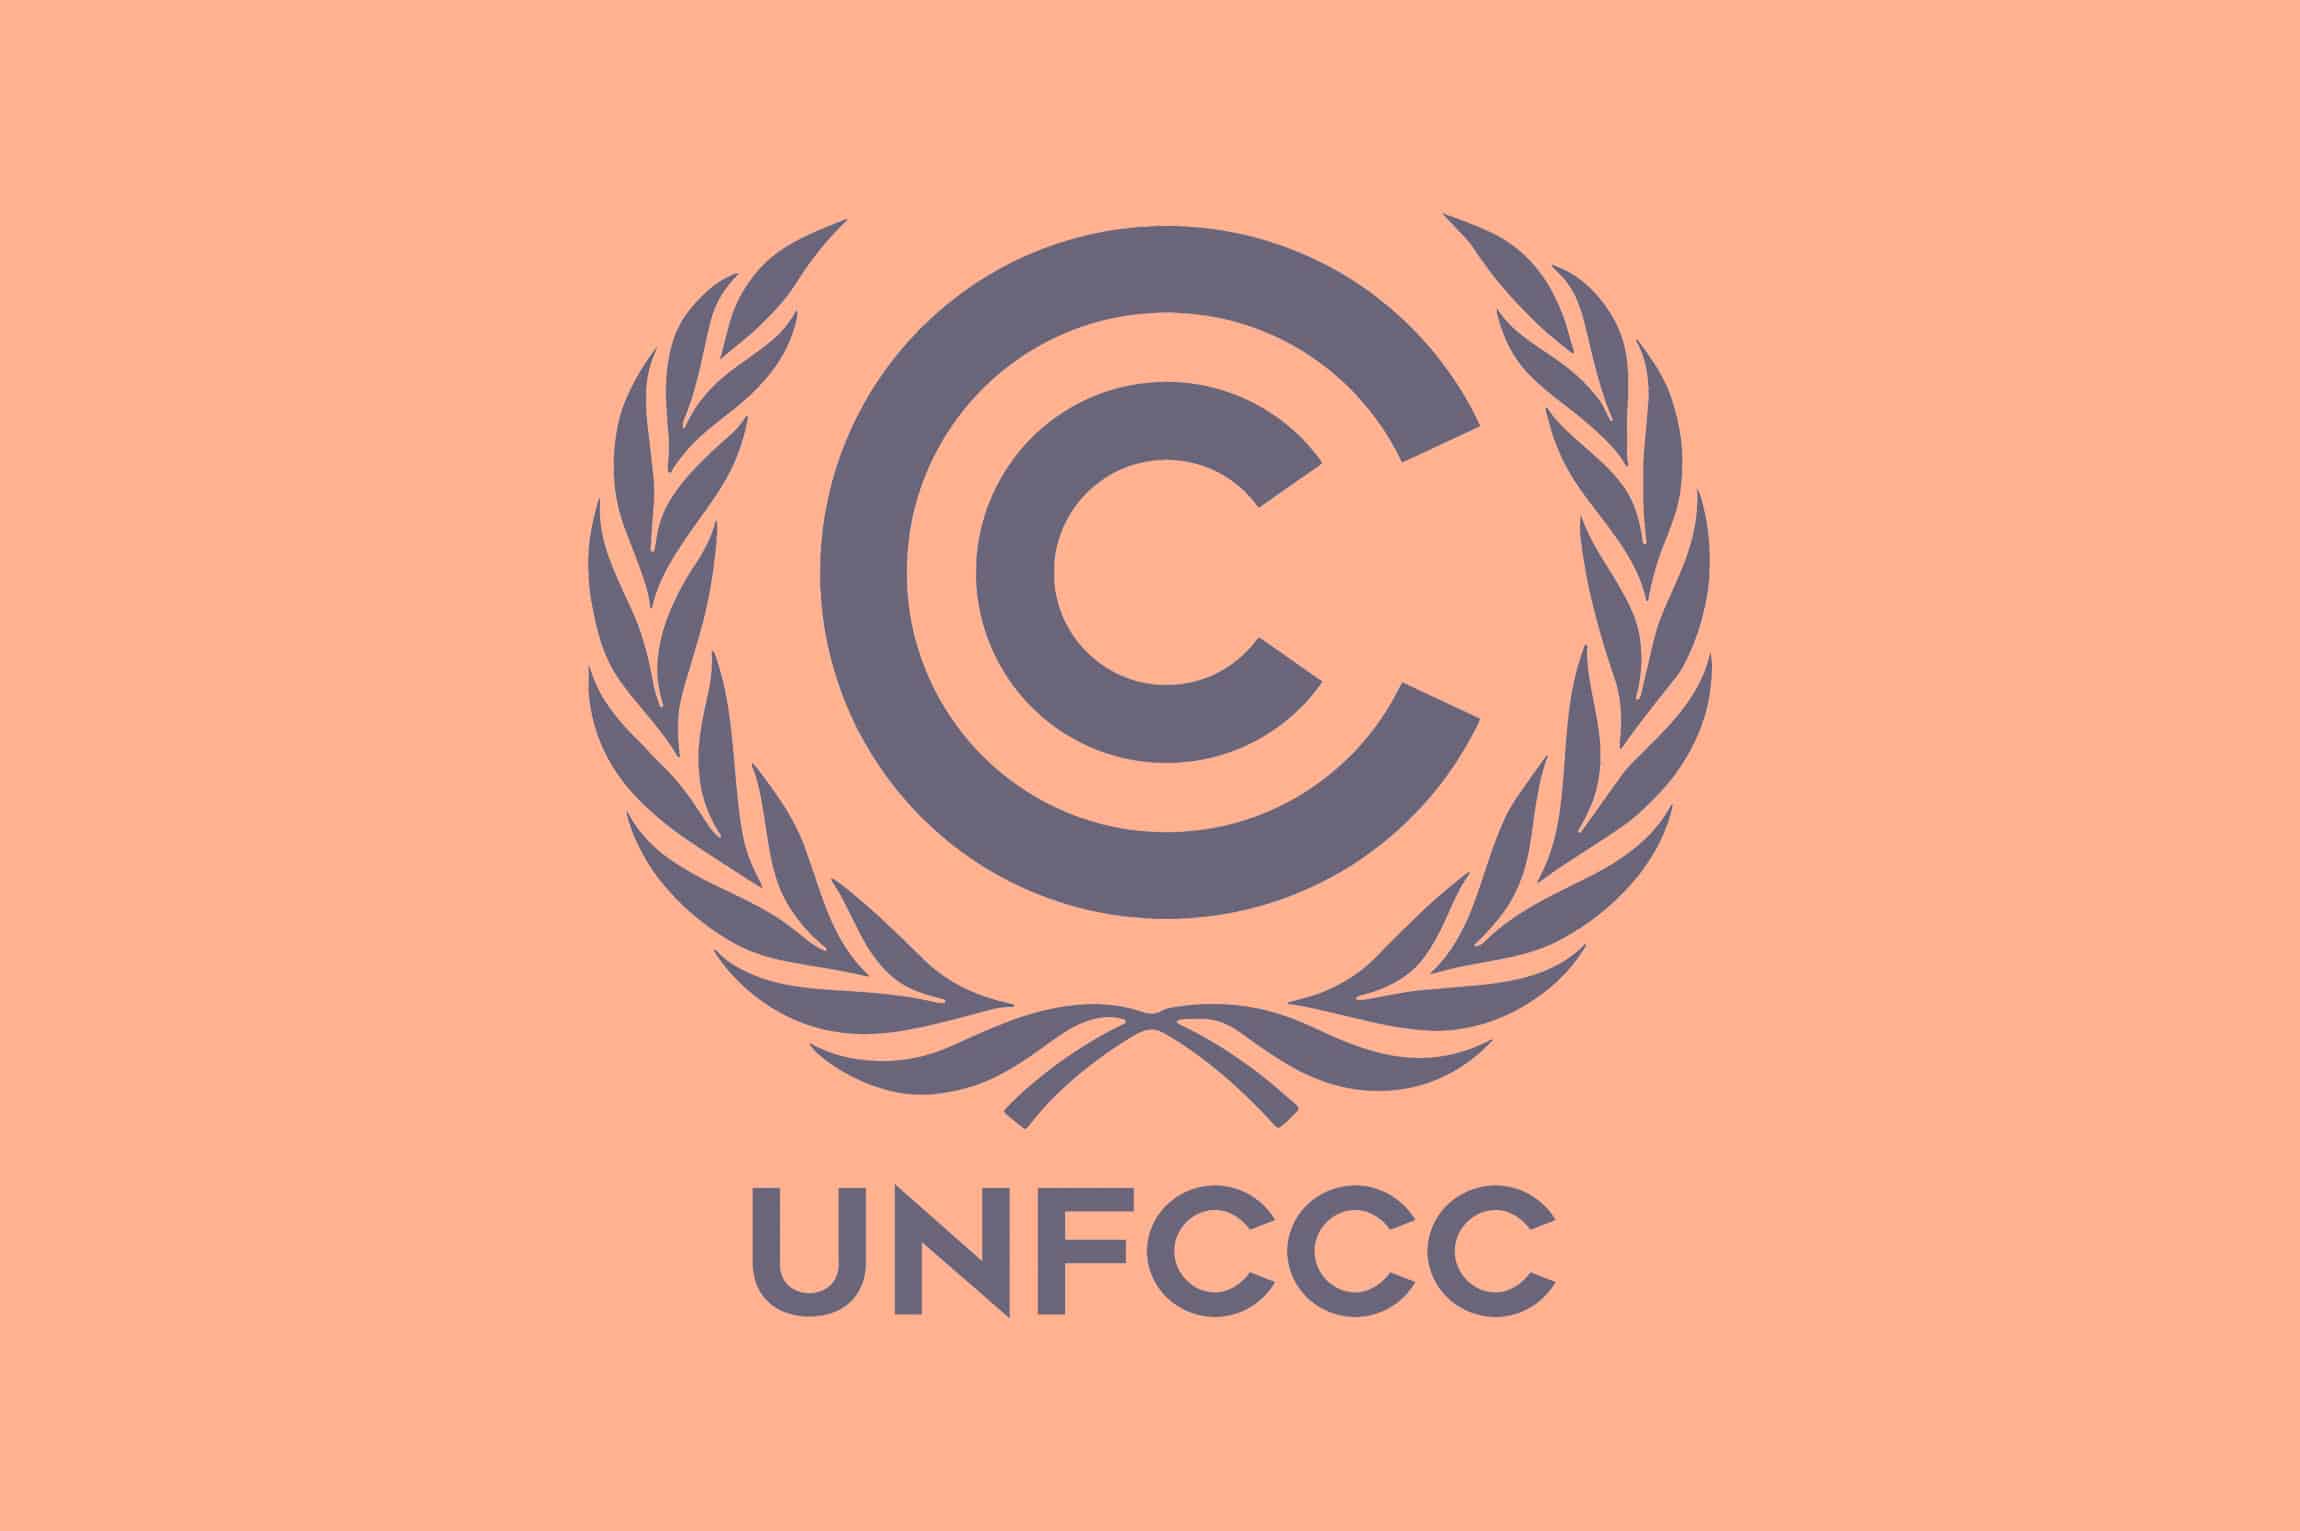 A logo for the United Nations Framework Convention on Climate Change (UNFCCC), in peach